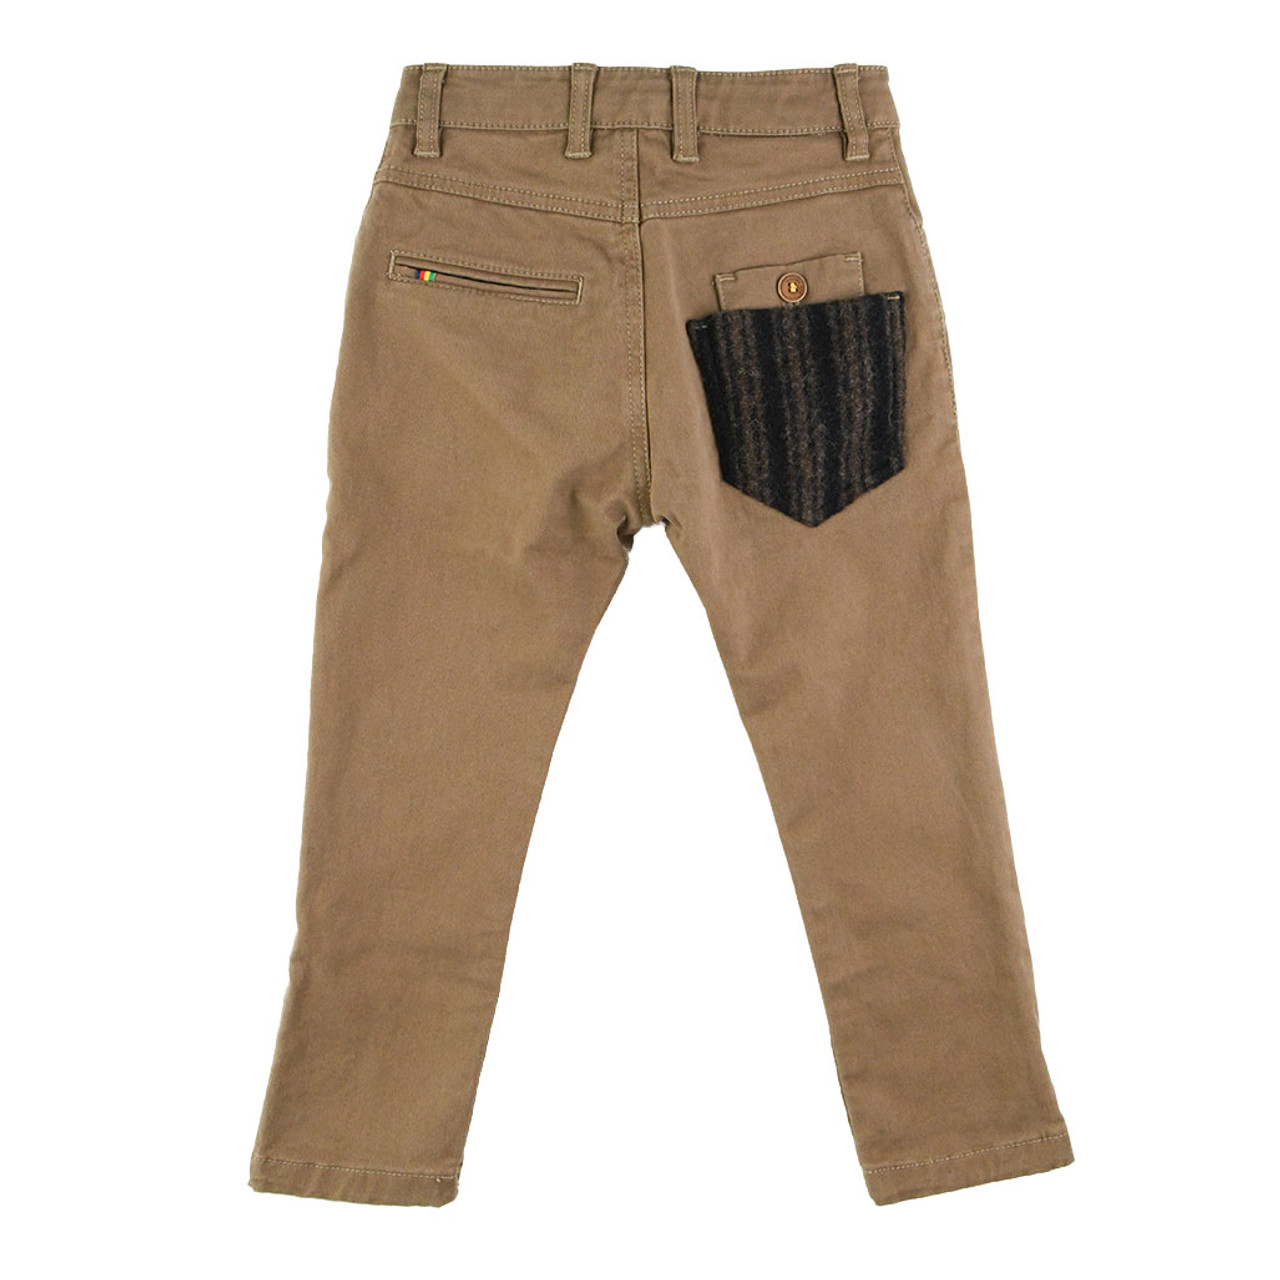 MANUEL RITZ Brown Pants for Boys - Boys' Collection | Hera + Hermes